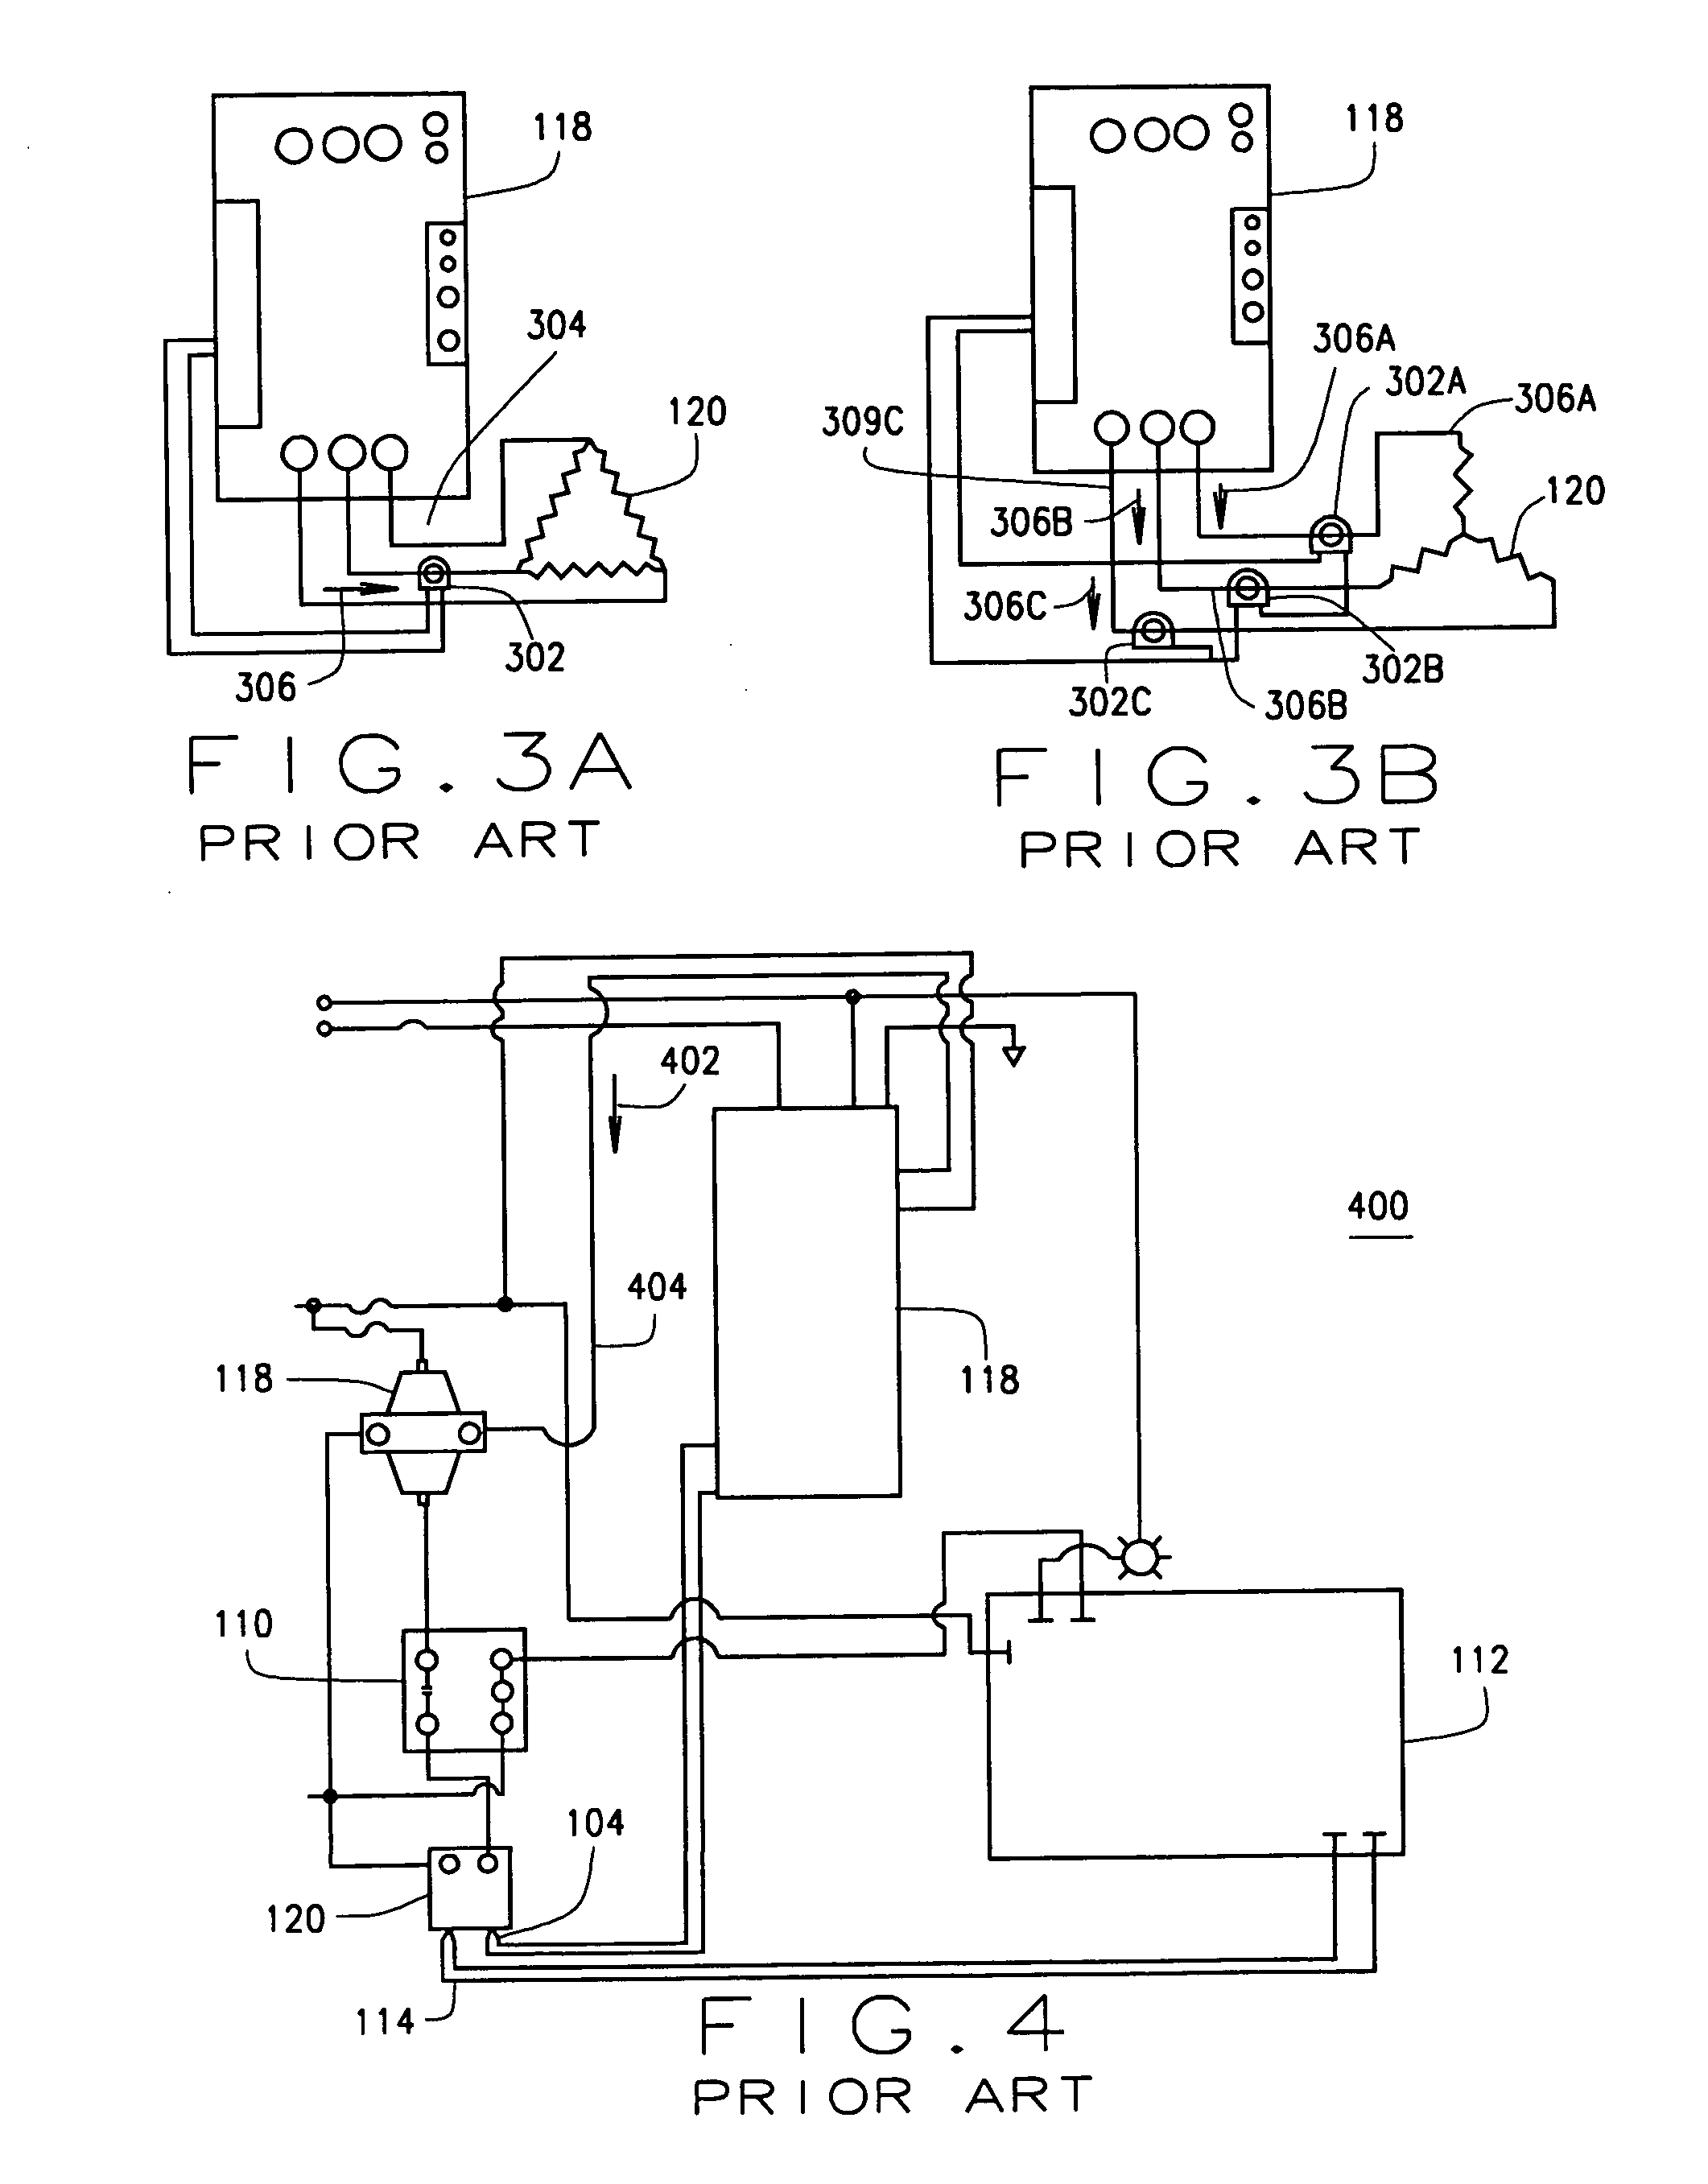 Integrally coupled power control system having a solid state relay